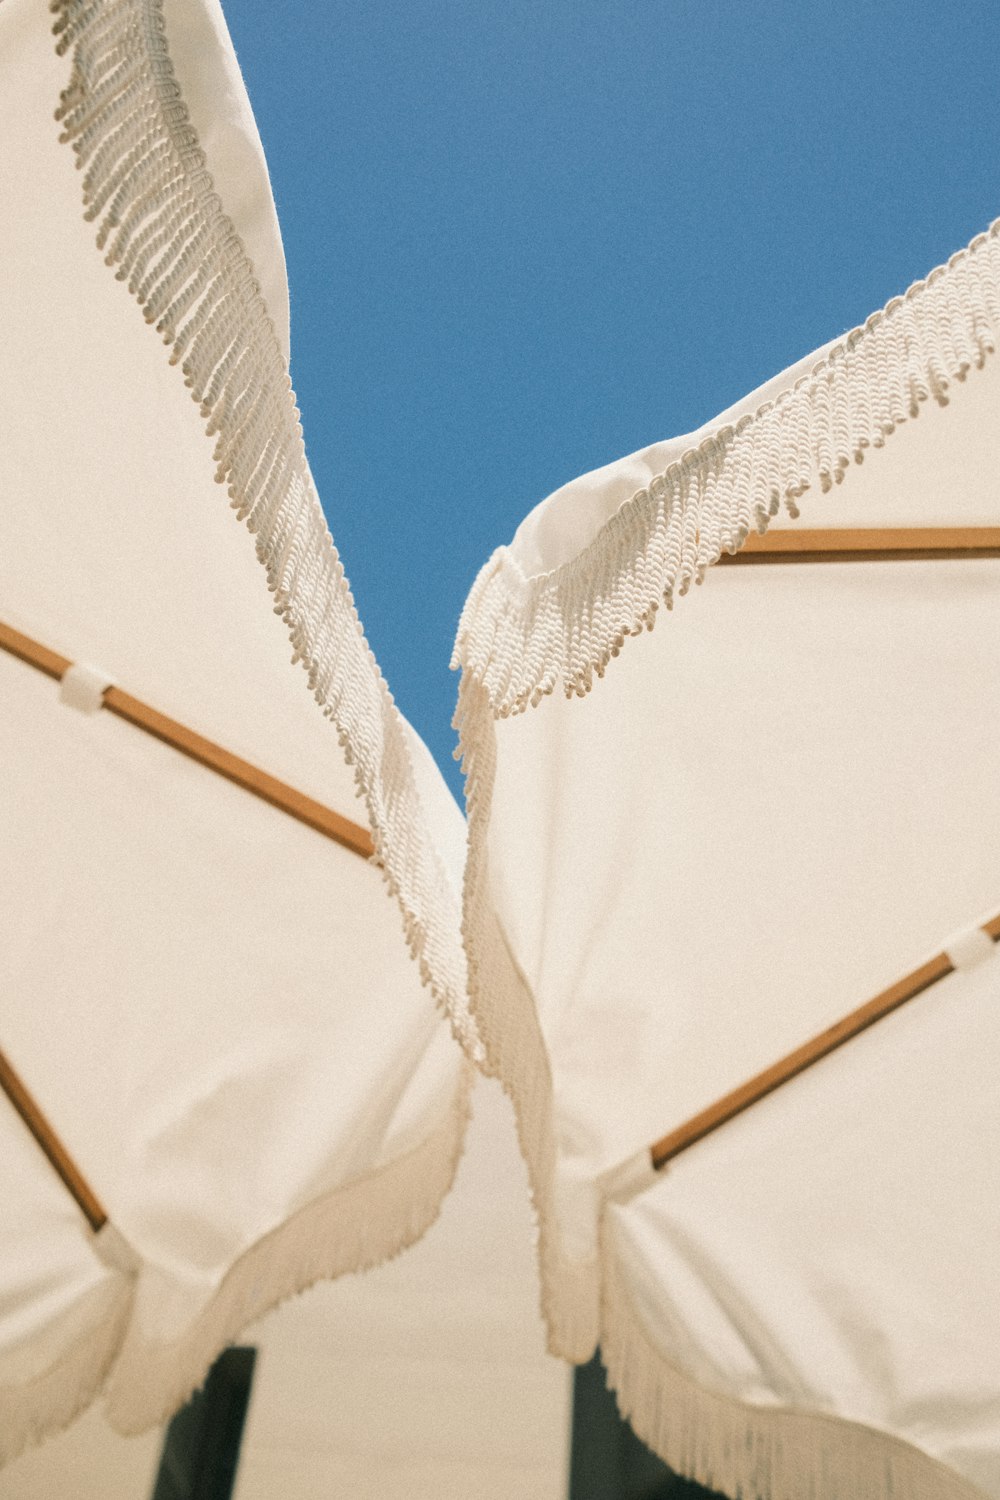 two white umbrellas with white fringes on them